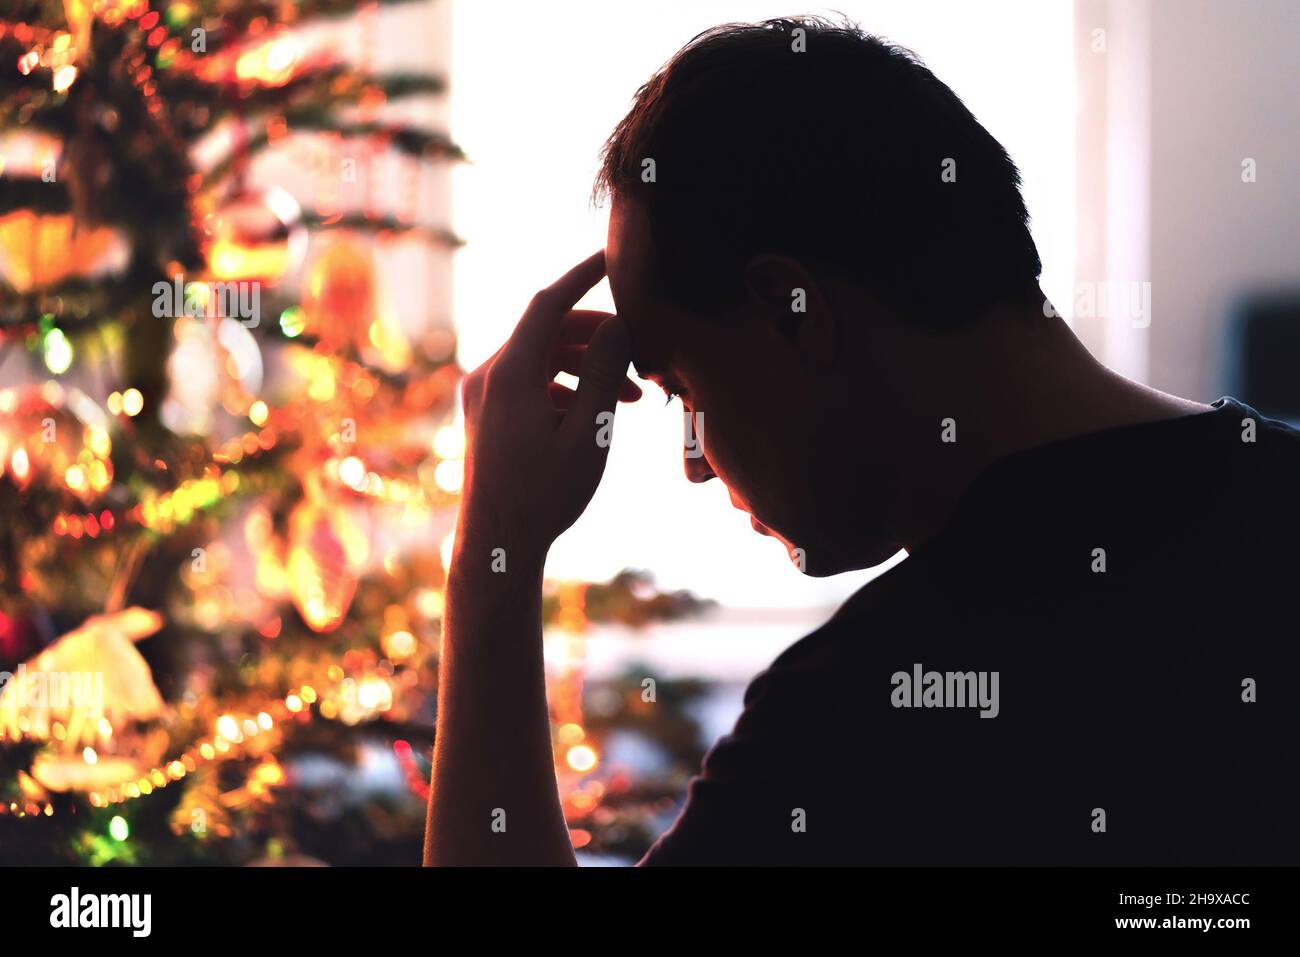 Sad on Christmas. Unhappy, lonely or tired man with stress, grief or depression. Family fight, loneliness, frustration or money problem on Xmas. Stock Photo